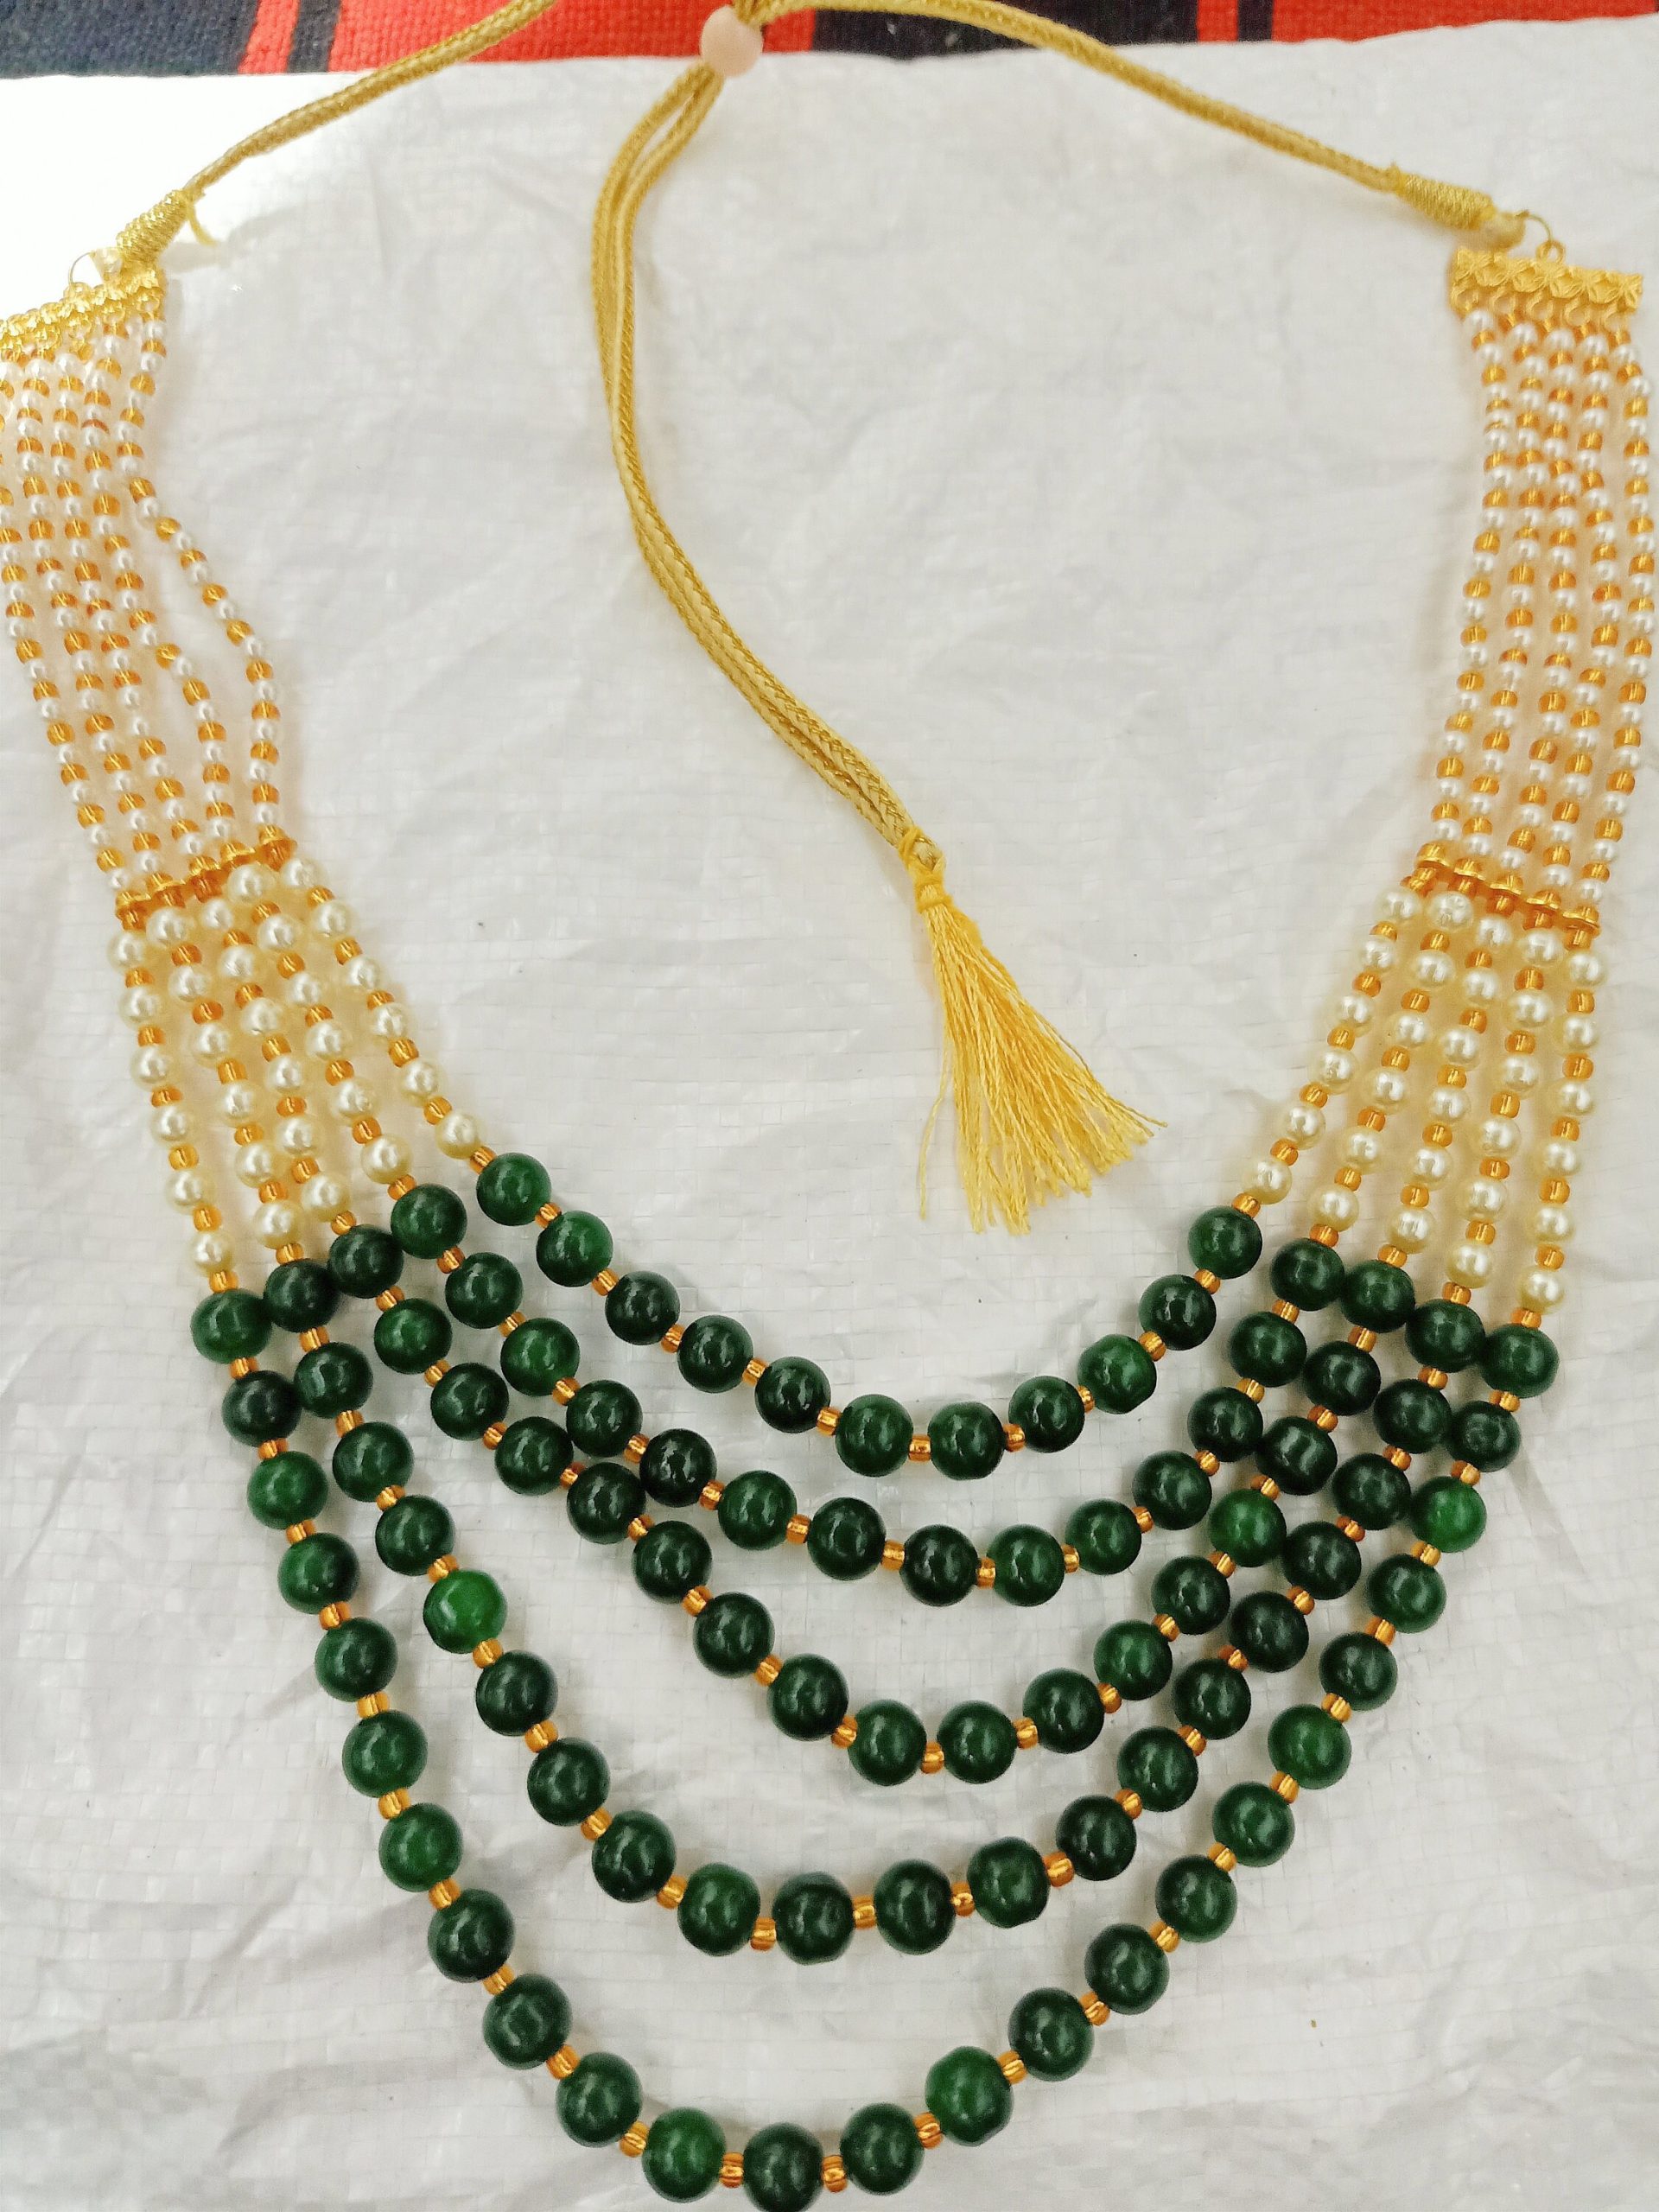 Vintage Pearl Beads Necklace With Green Moti Mala Strand 5 Line India | Save 33% - Rajasthan Living 20